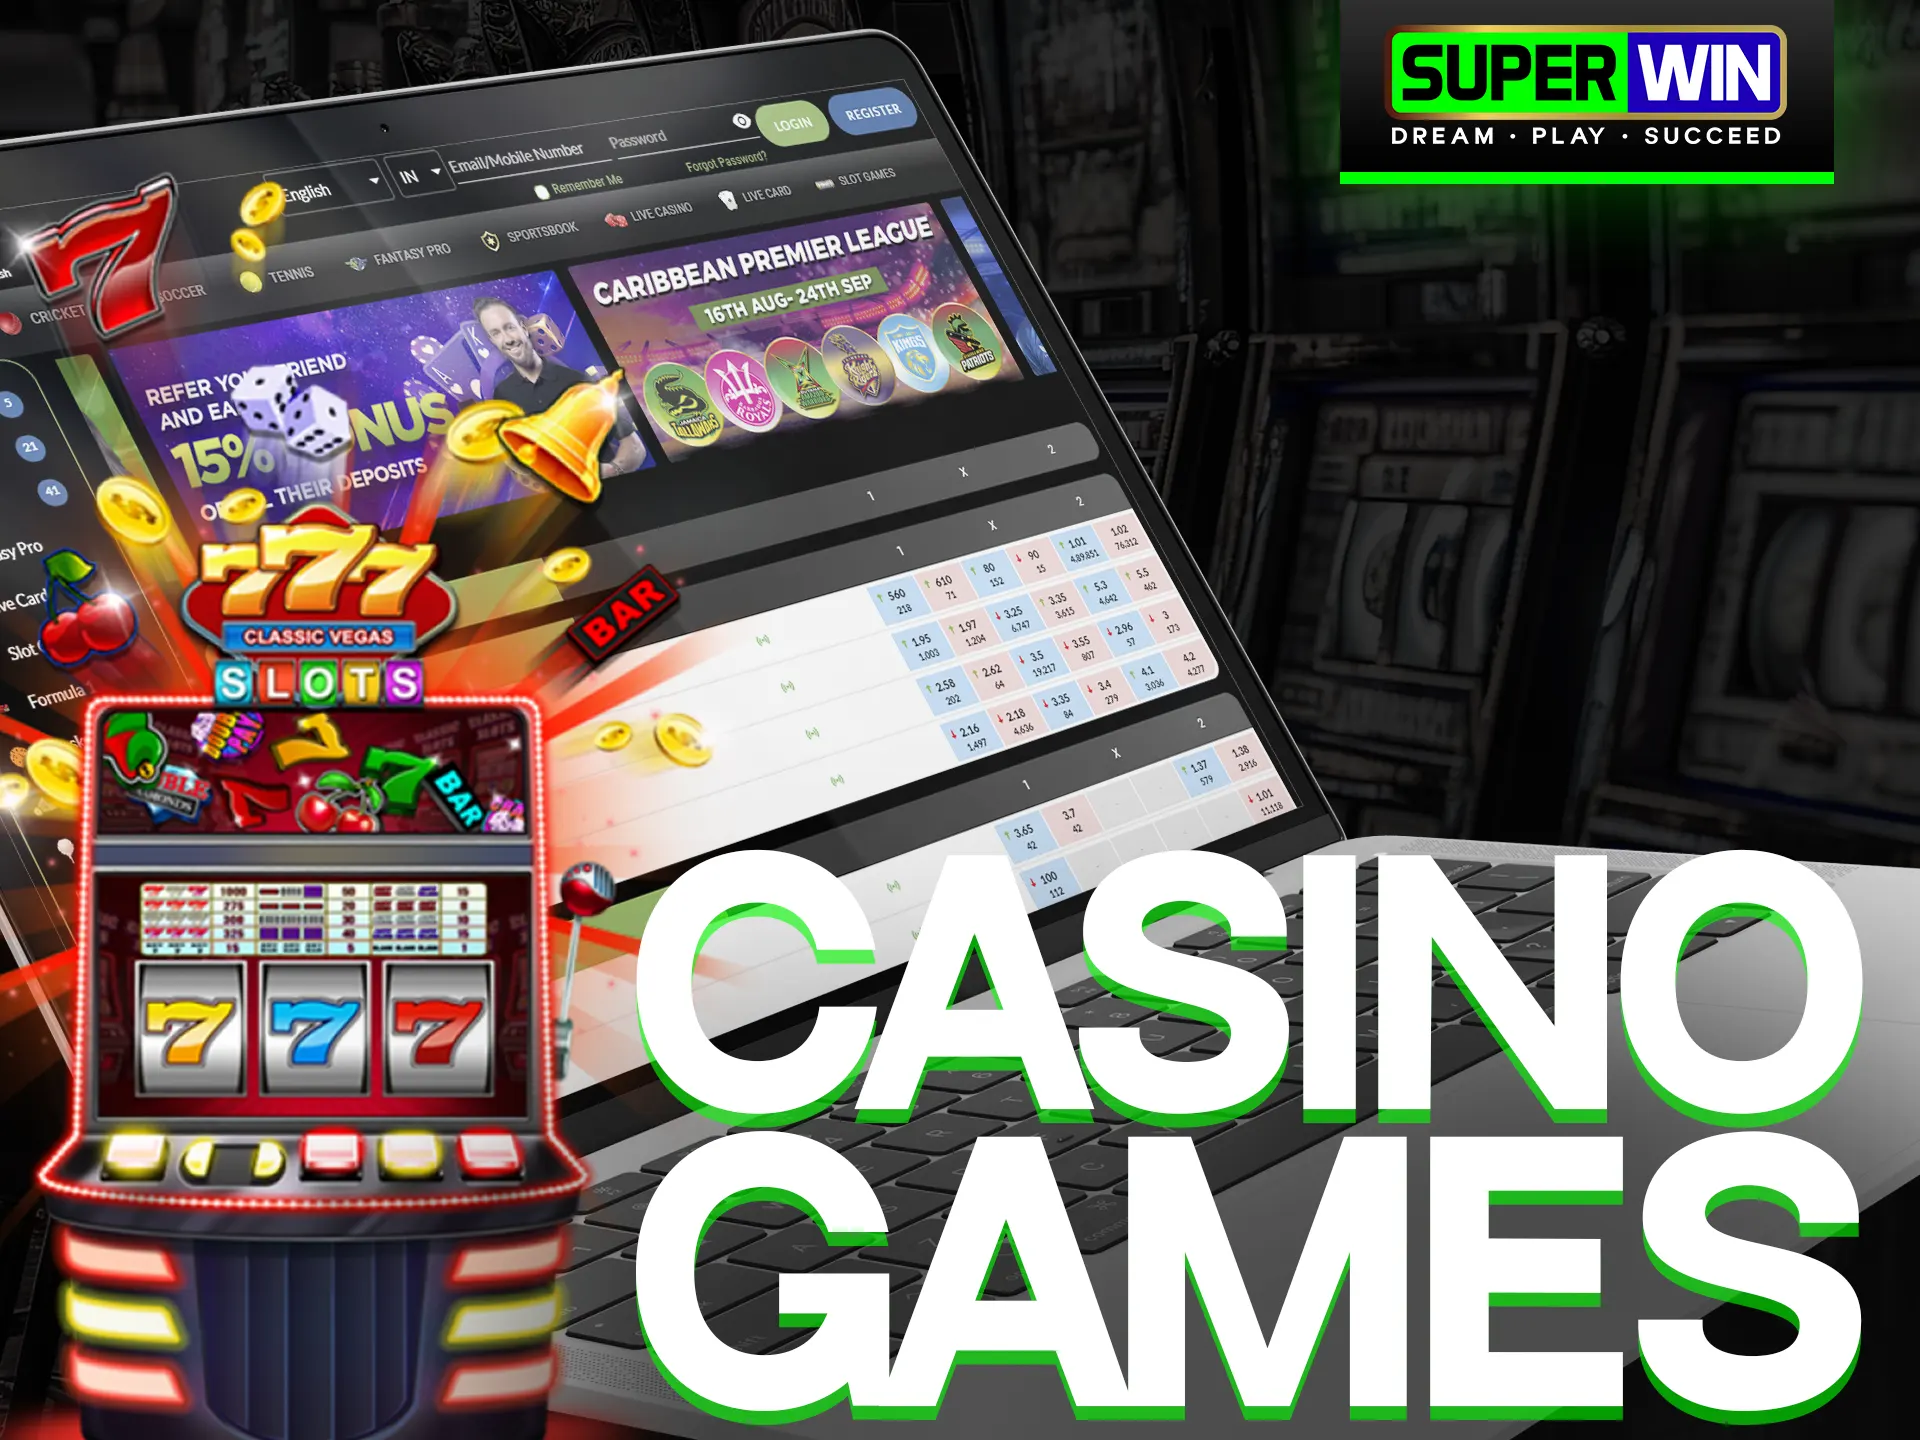 Superwin offers a wide range of casino games.